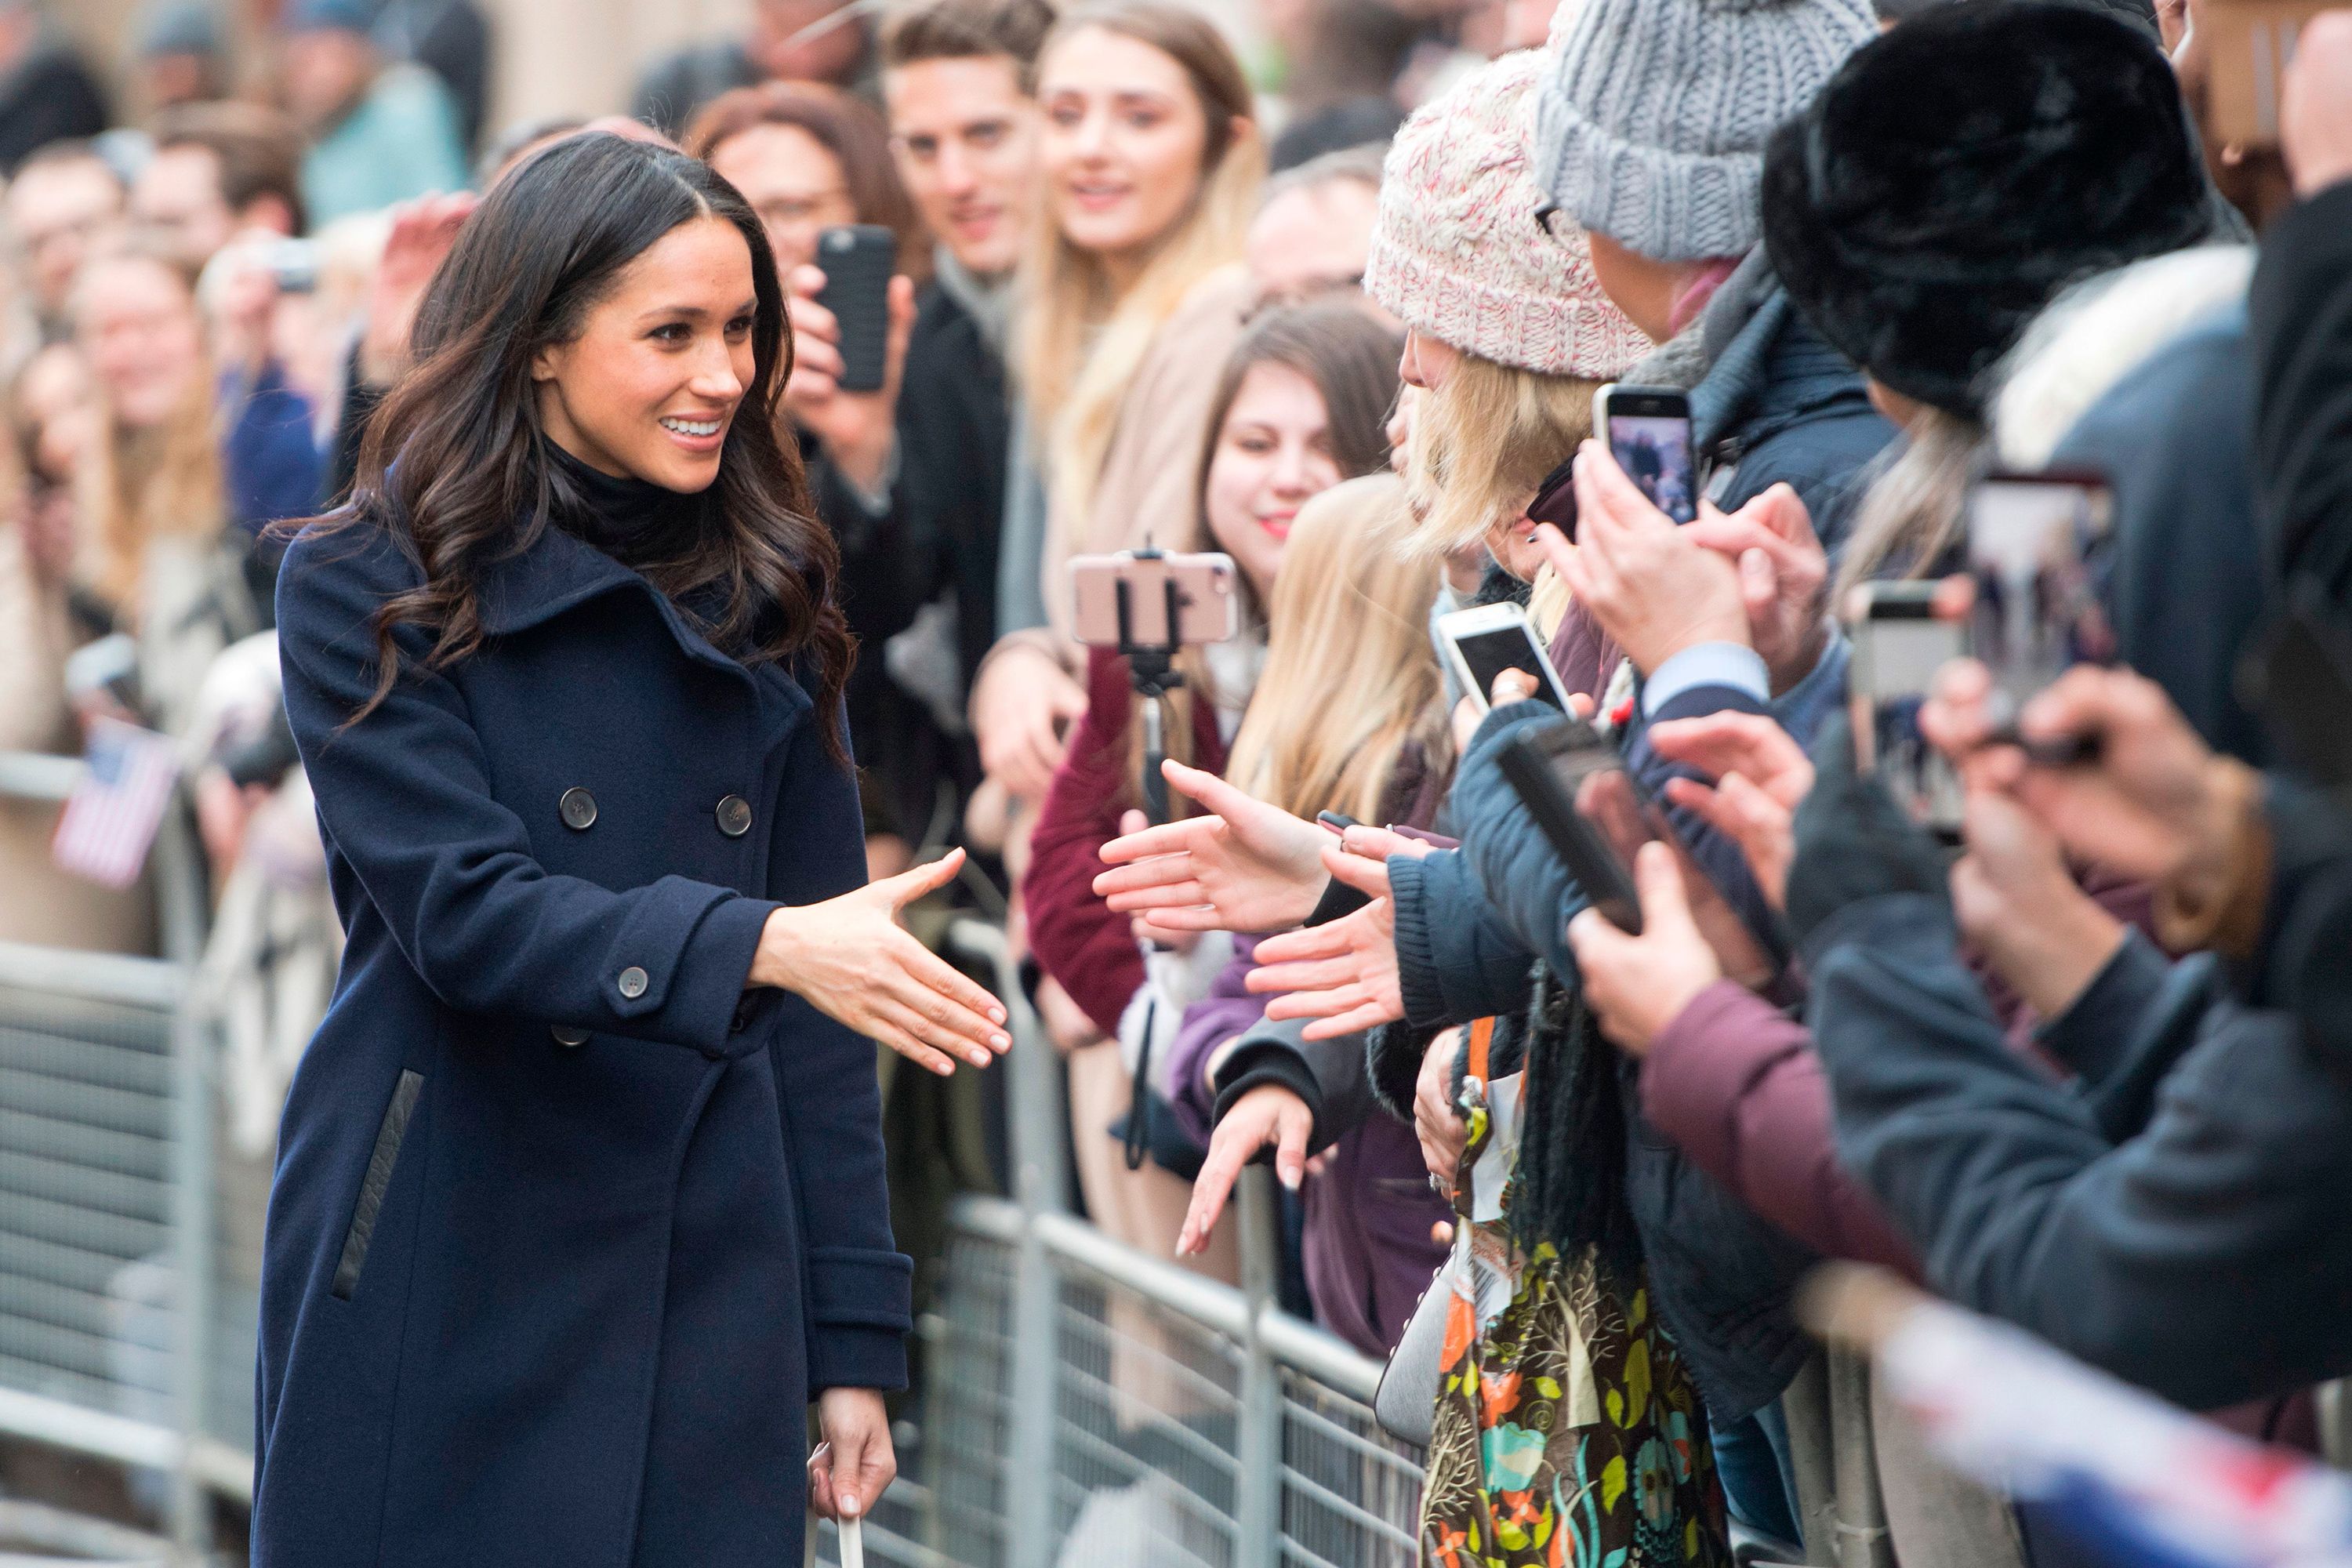 What to know about Strathberry – Meghan Markle's favourite handbag